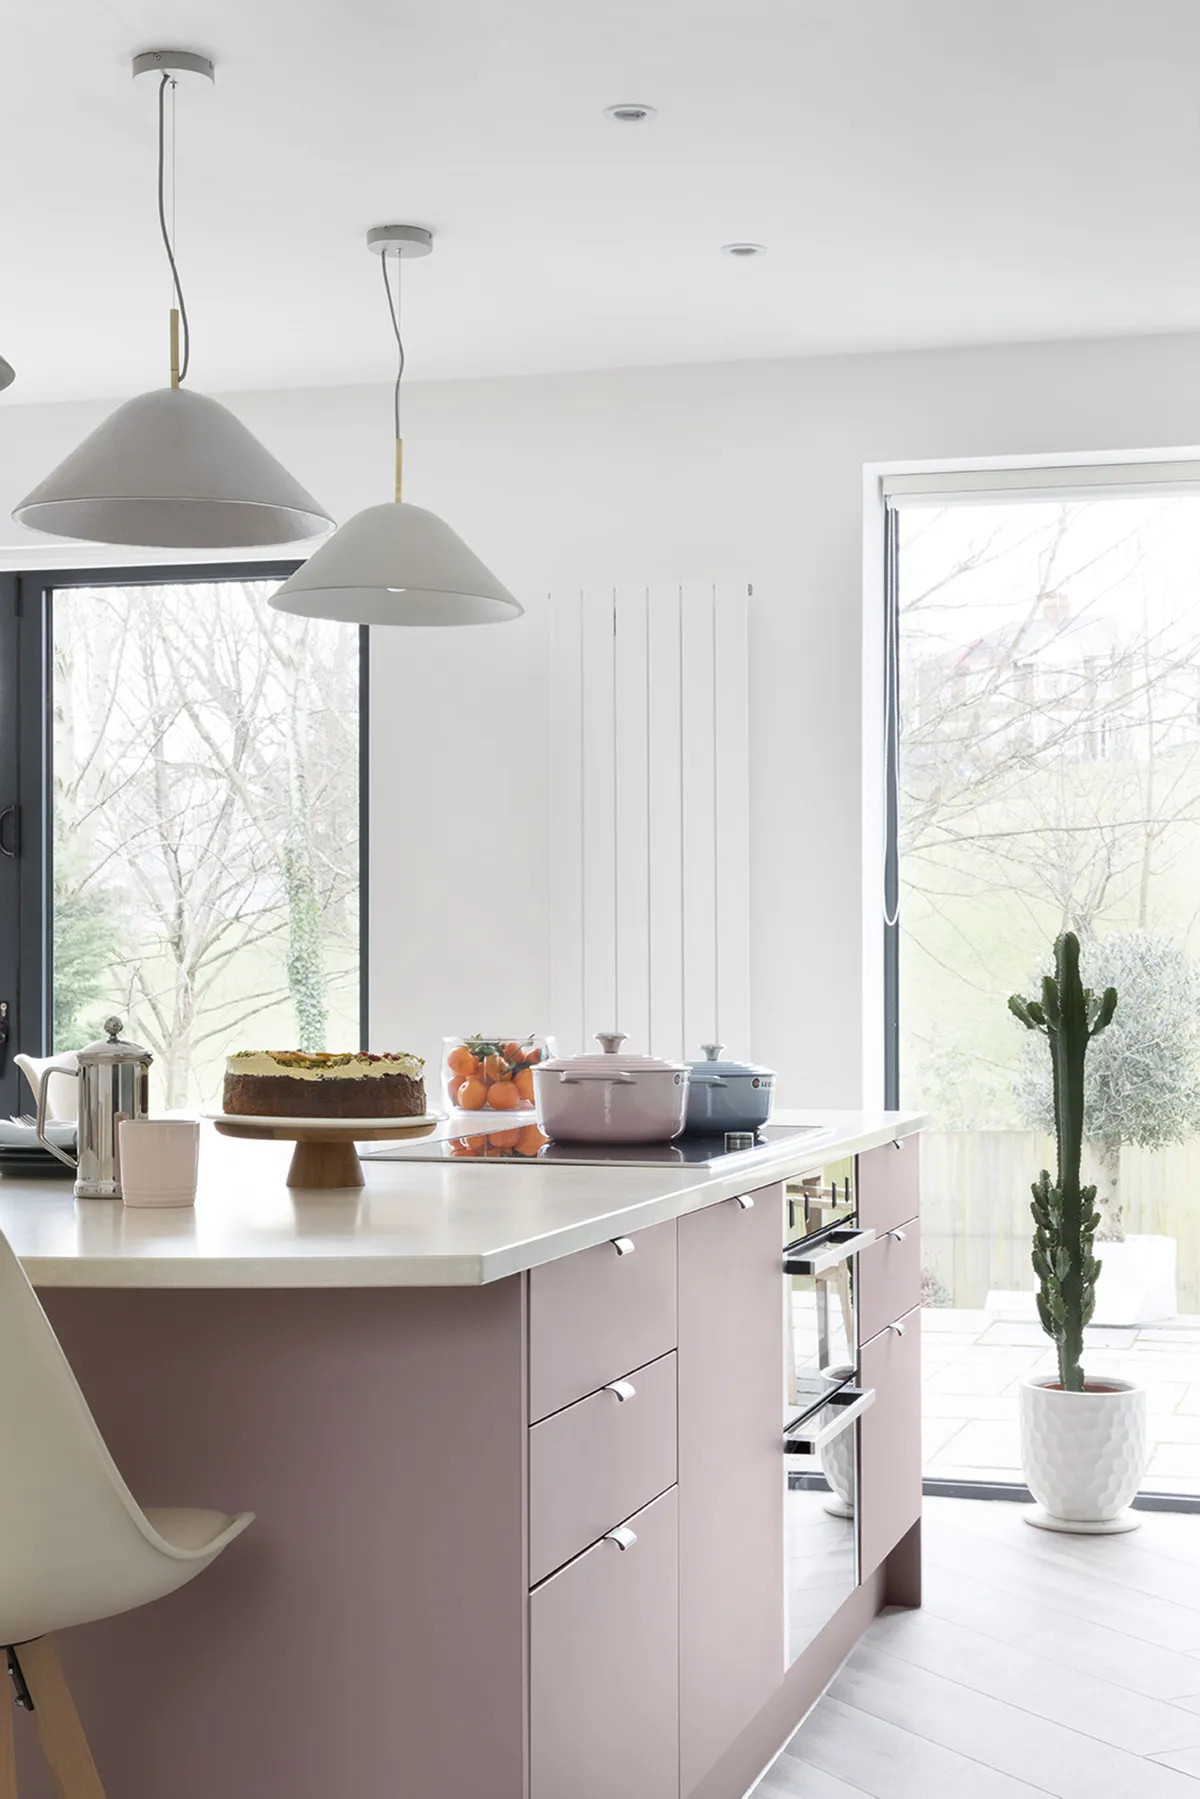 ‘Our kitchen overlooks a really pretty park, so we were keen to incorporate the view into the design,’ says Alexandra. They fitted an almost floor-to-ceiling window, and double doors in the dining area, to frame the view